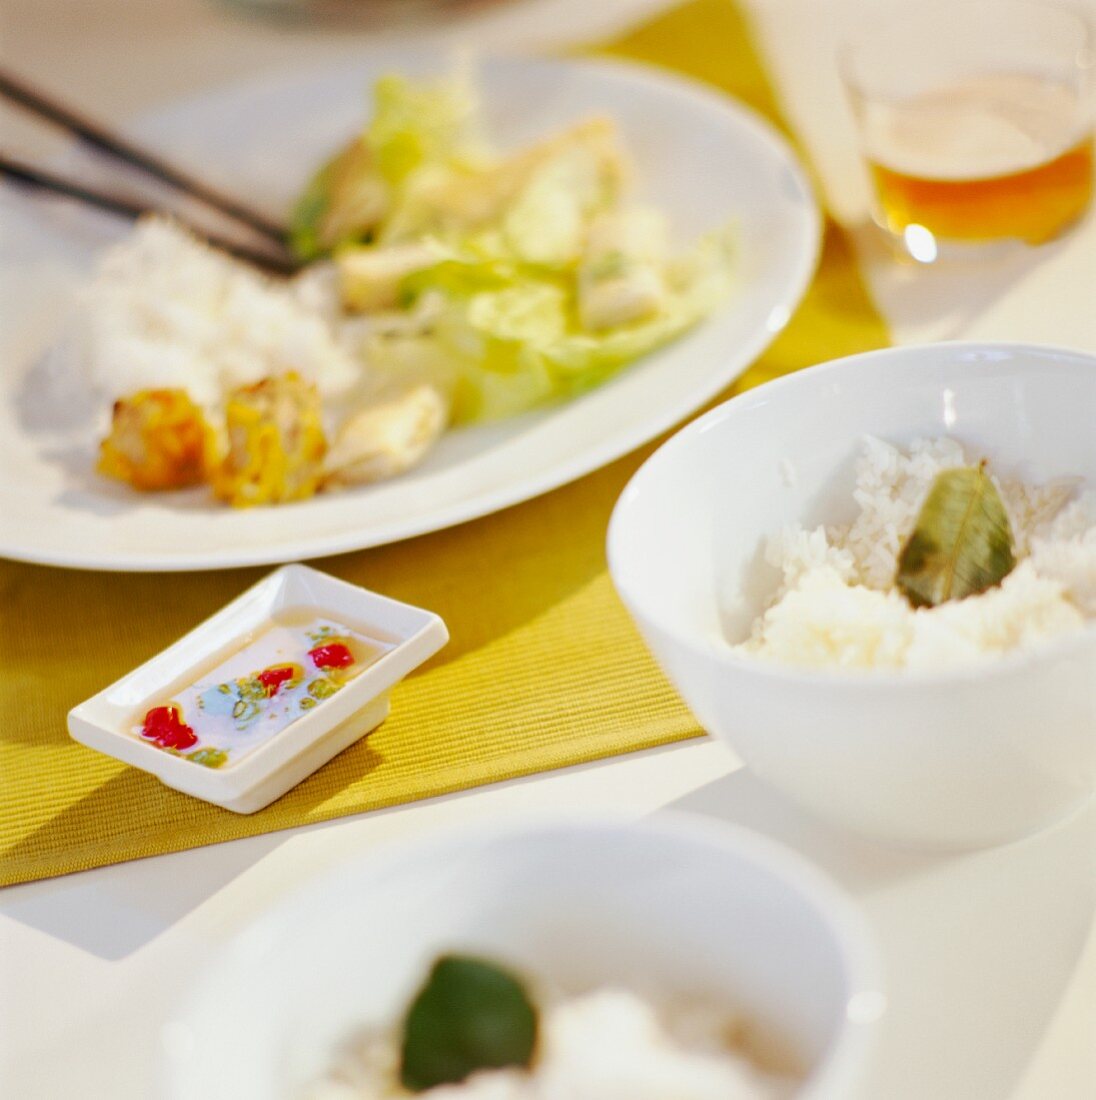 Rice side dishes with Oriental dishes